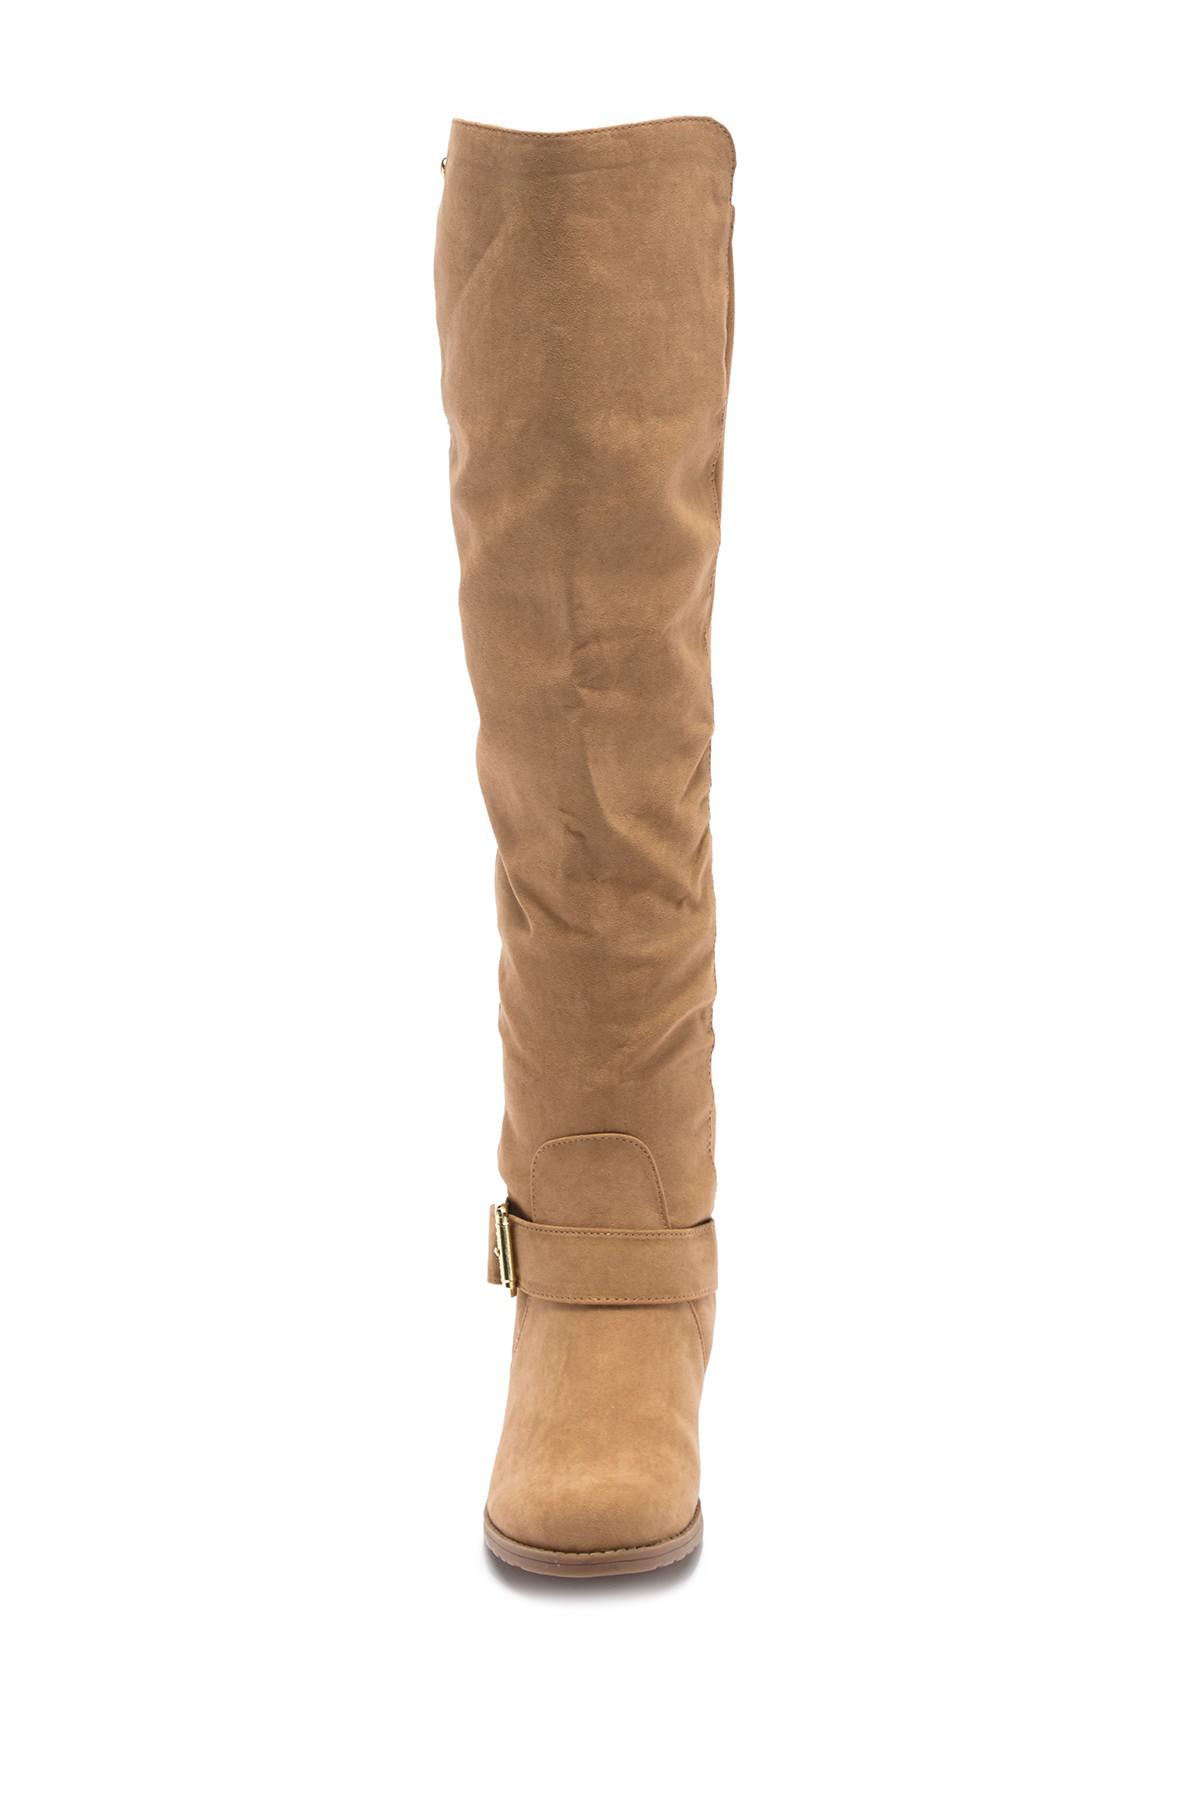 G by Guess Cory Over The Knee Boot in 